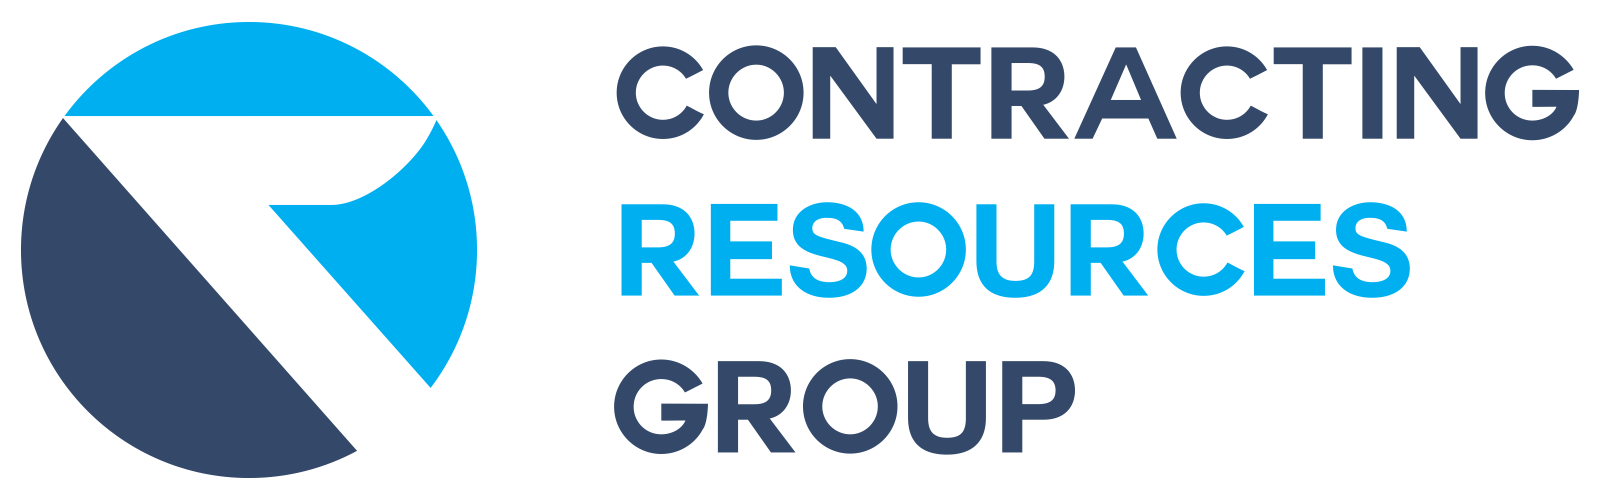 Contracting Resources Group, Inc. logo